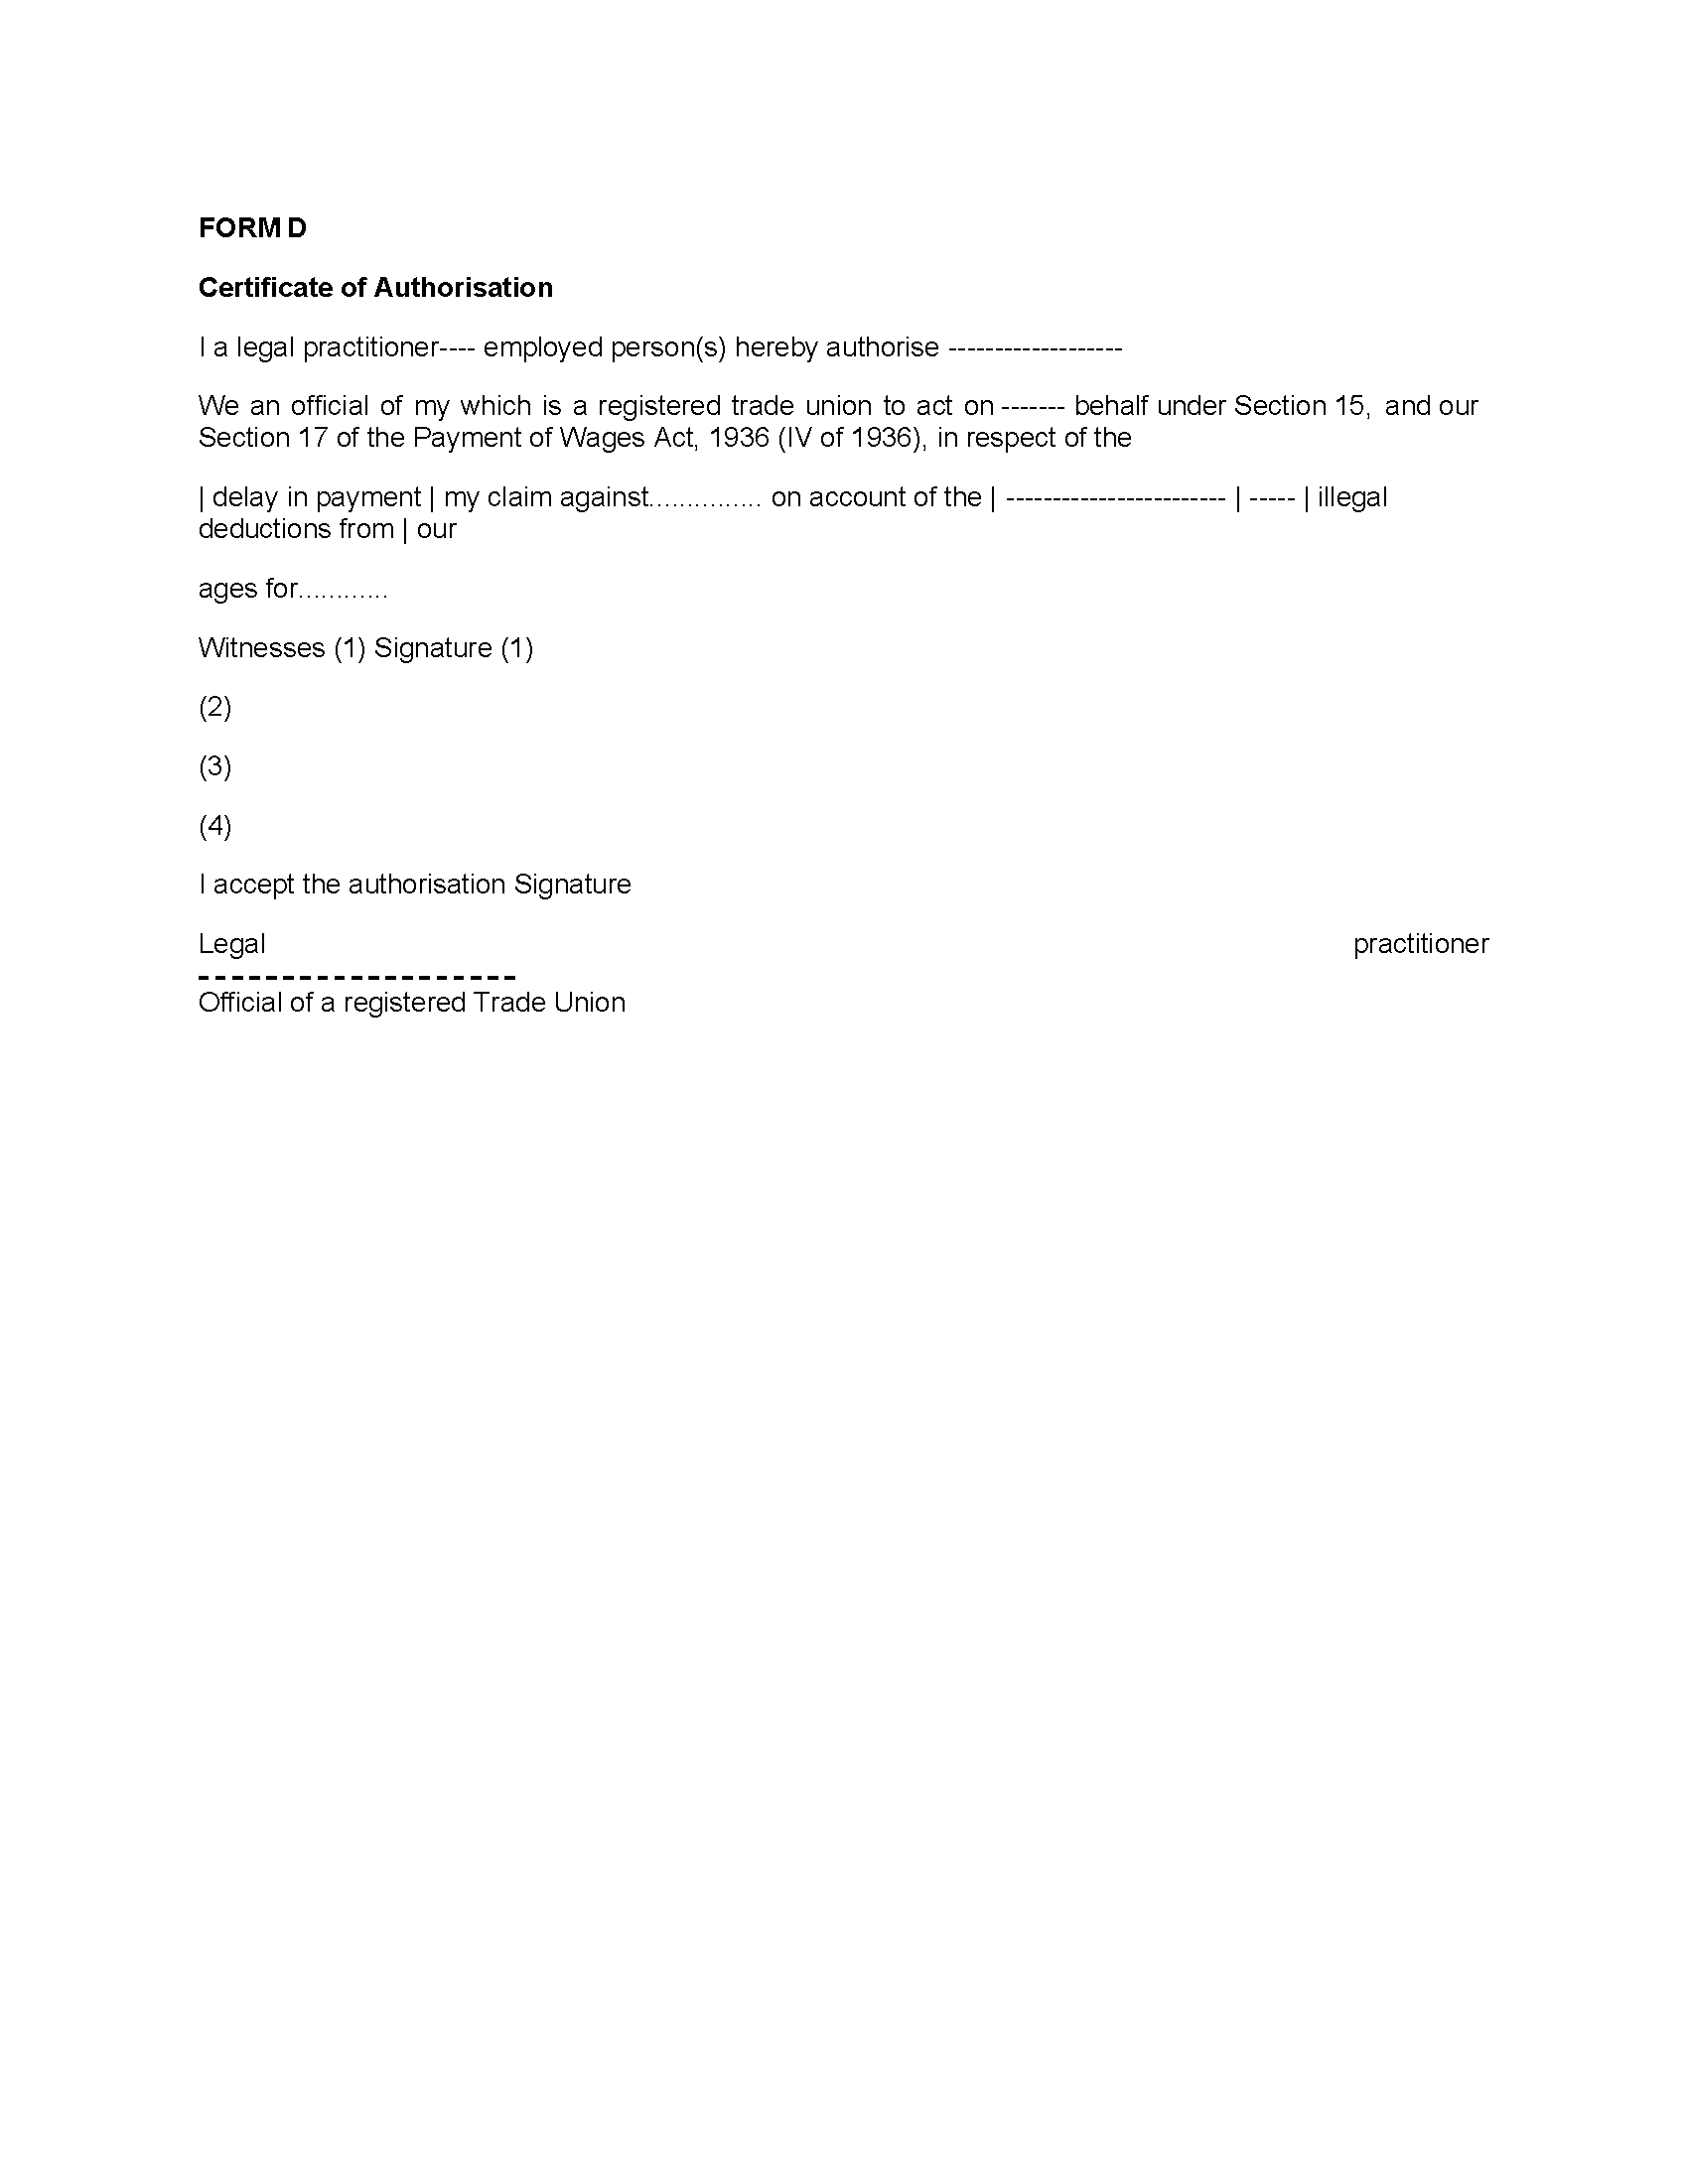 37 - FORM D Certificate of Authorization-converted